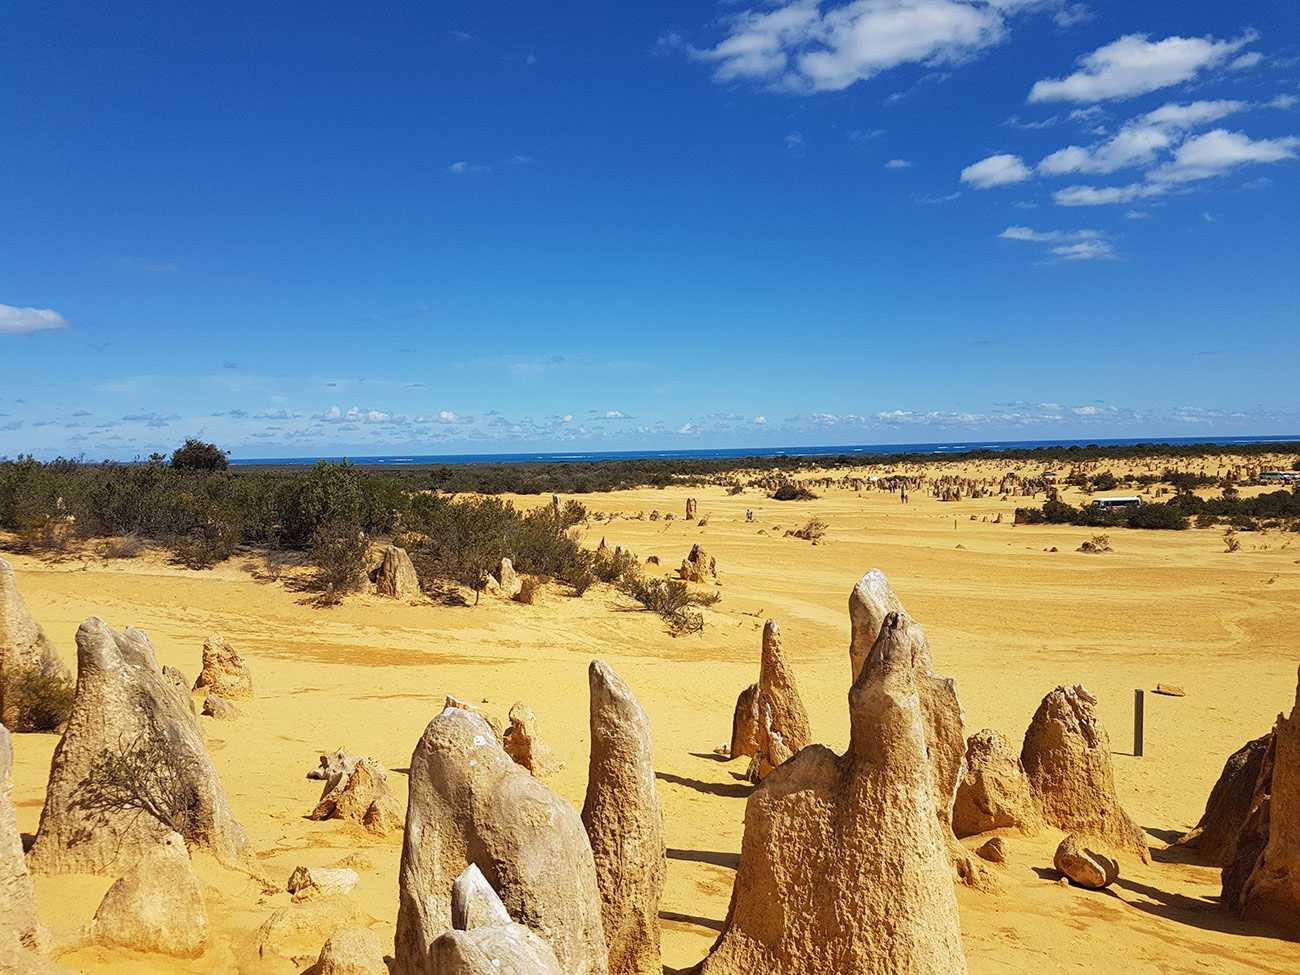 Be mesmerized by the Pinnacles